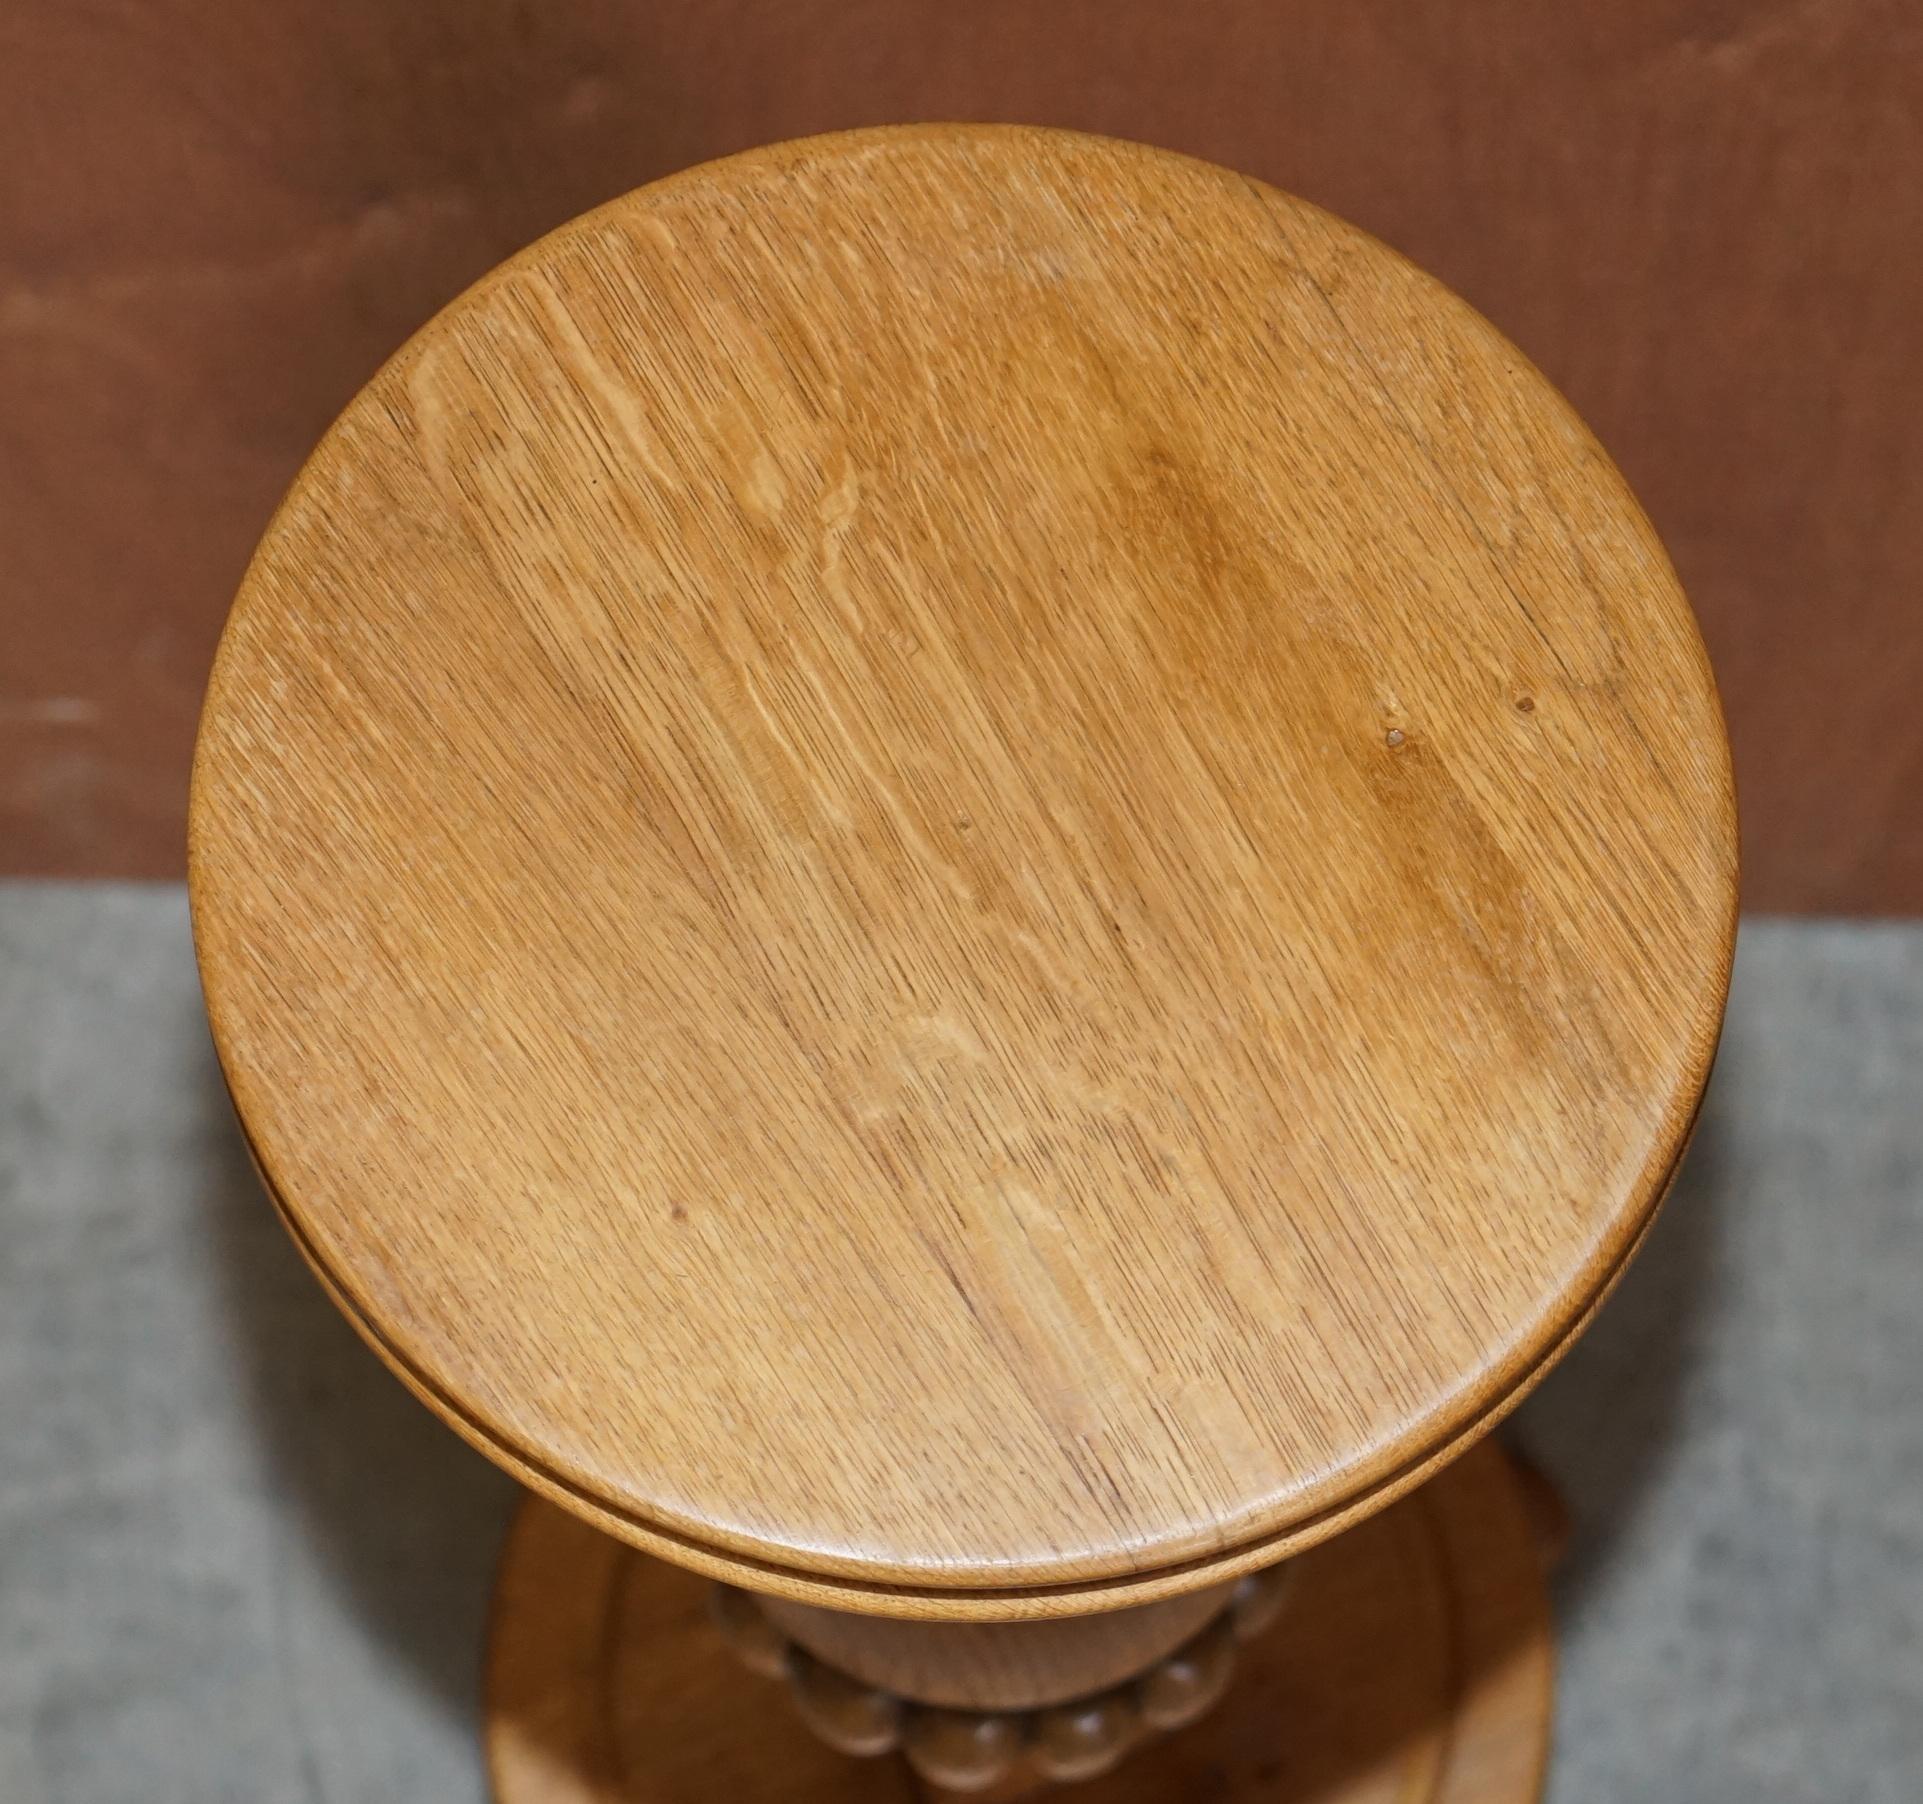 We are delighted to offer for sale this lovely hand made in England, light oak pedestal Stand for displaying plants, busts, taxidermy, and trinkets

A good looking and well made piece, the timber patina is natural, it has a nice rich warm glow to